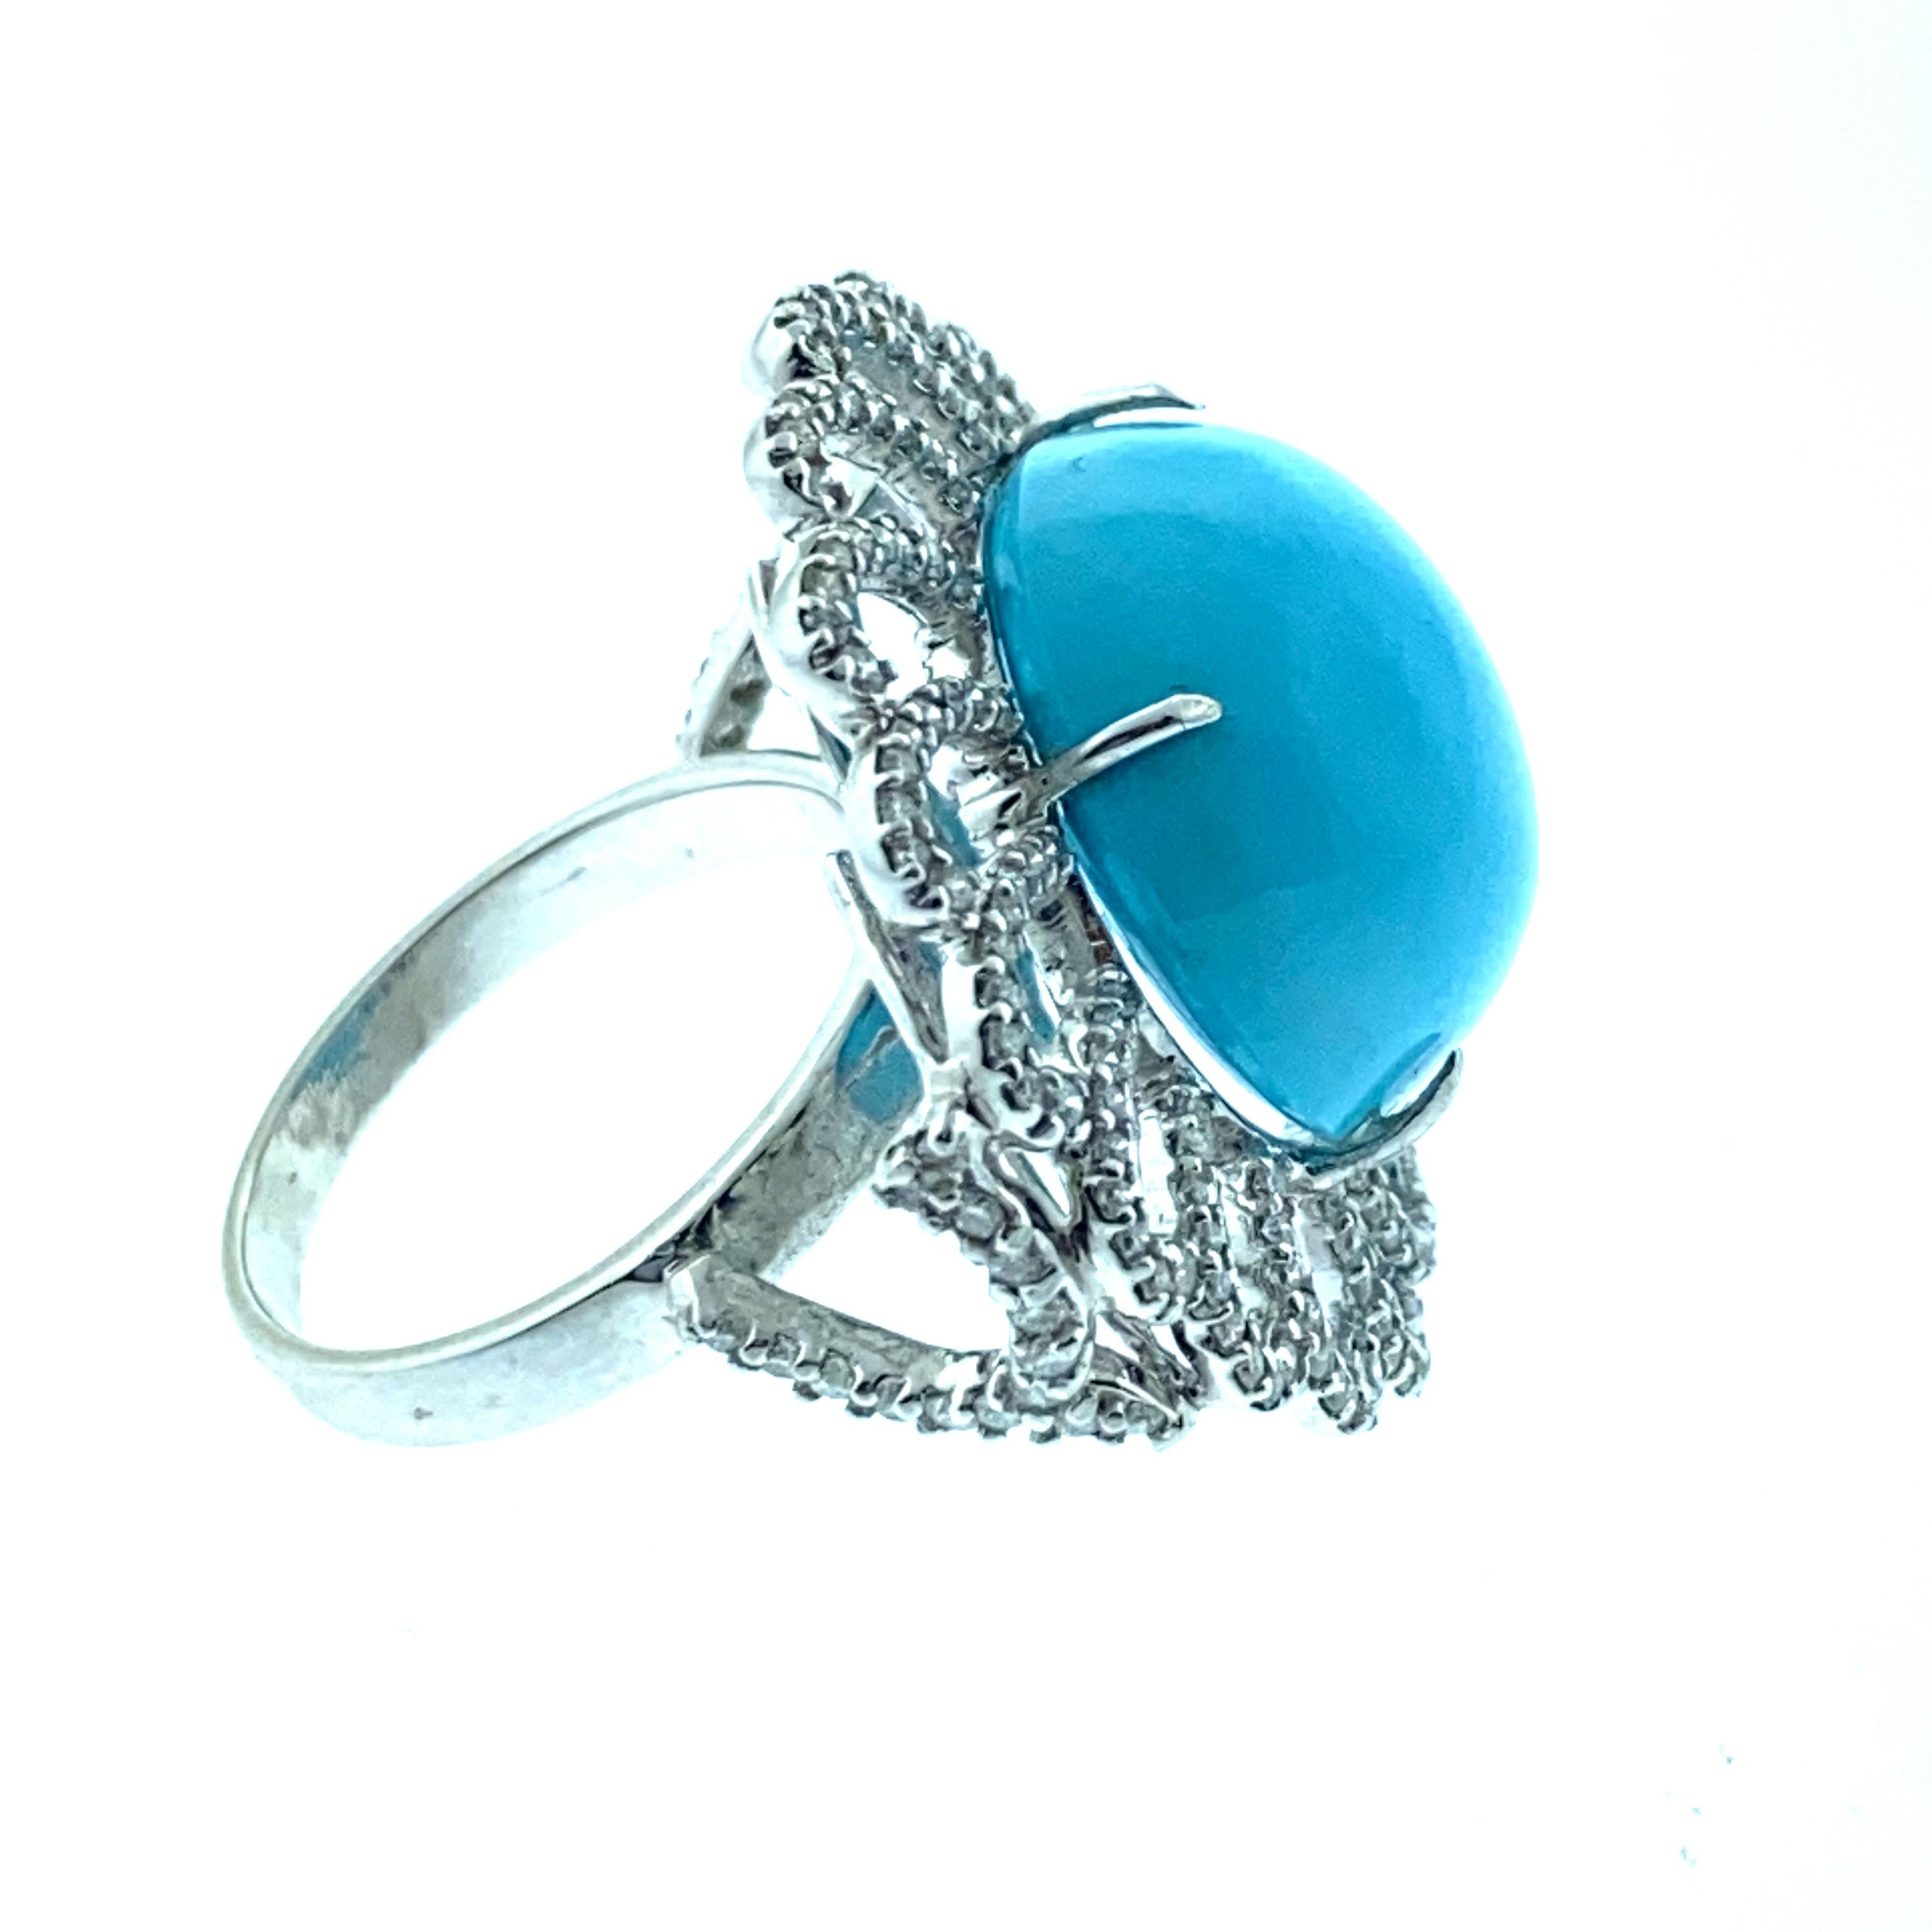 22.56 Carat Turquoise, 1.12 Carat Diamond Ring in 18 Karat White Gold In New Condition For Sale In New York, NY